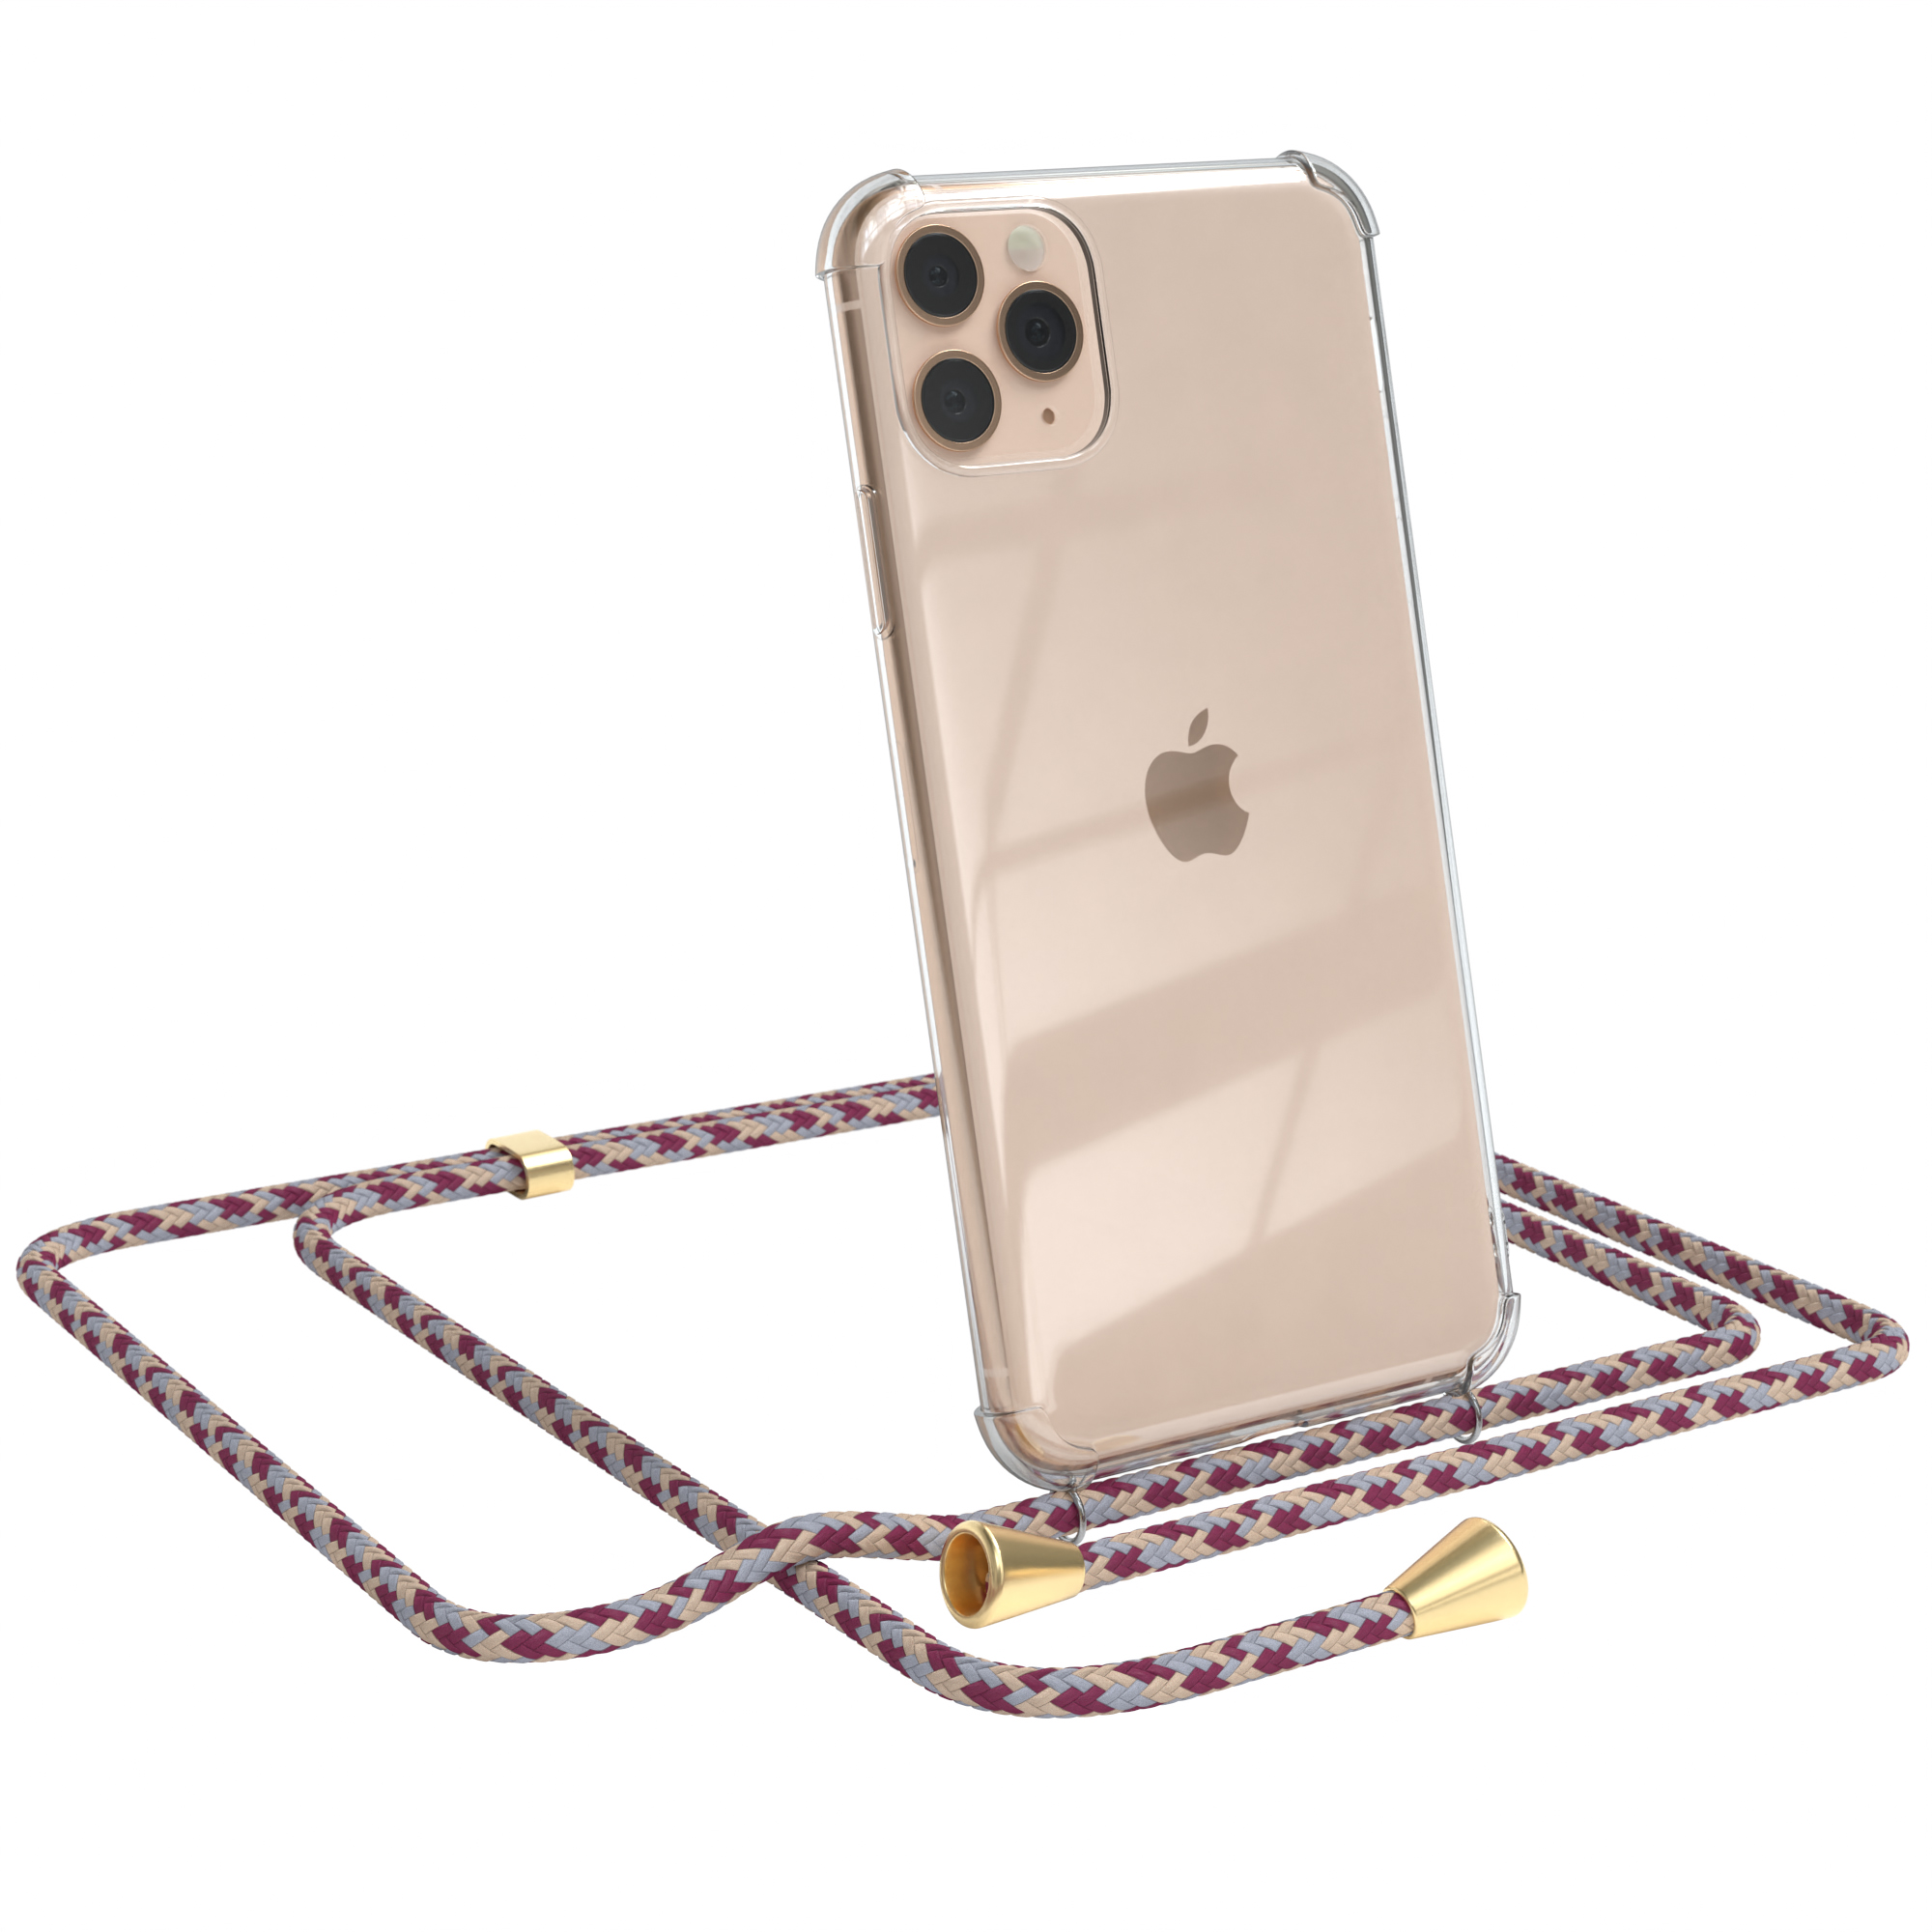 EAZY Pro Apple, Cover mit / Clear Umhängeband, 11 iPhone Max, Beige Umhängetasche, Rot Gold CASE Camouflage Clips